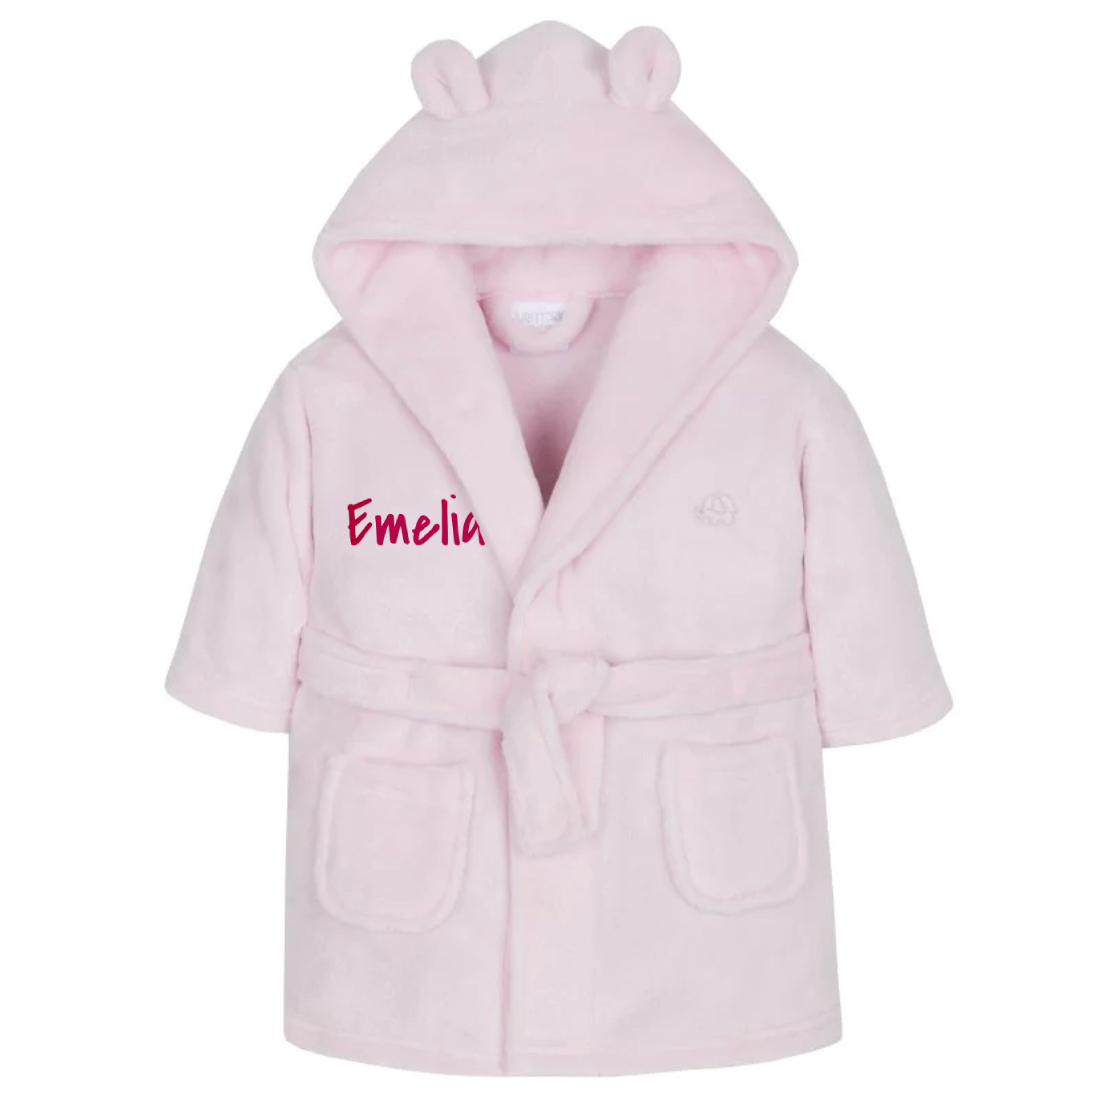 Solesmith Personalised Reversible Dressing Gown at John Lewis & Partners